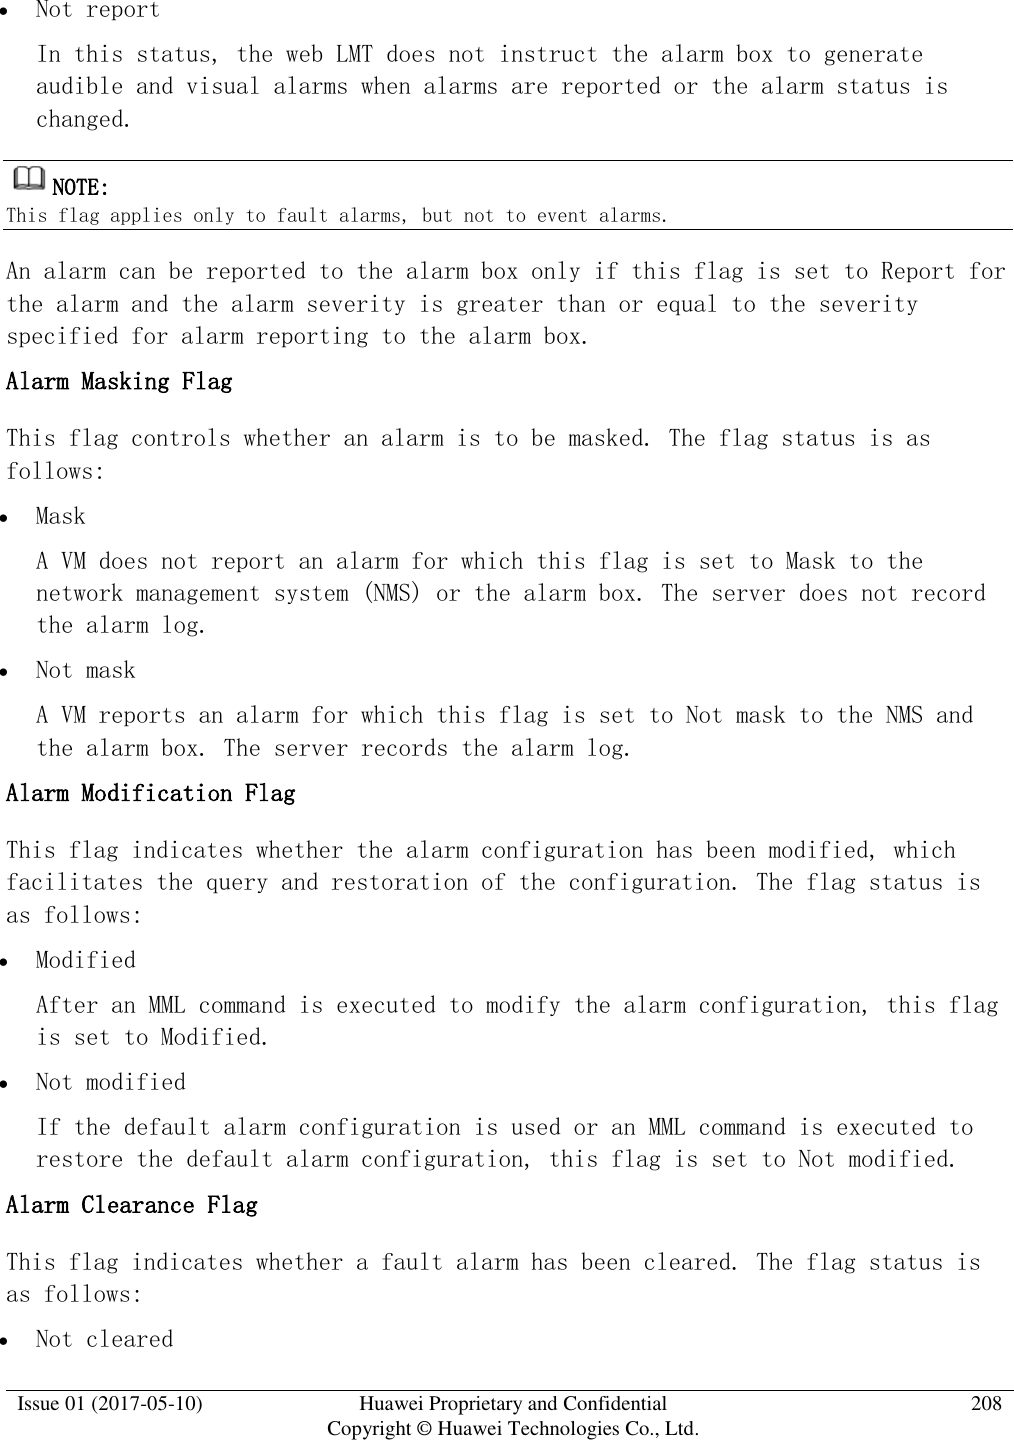  Issue 01 (2017-05-10) Huawei Proprietary and Confidential      Copyright © Huawei Technologies Co., Ltd. 208   Not report In this status, the web LMT does not instruct the alarm box to generate audible and visual alarms when alarms are reported or the alarm status is changed.  NOTE:  This flag applies only to fault alarms, but not to event alarms.  An alarm can be reported to the alarm box only if this flag is set to Report for the alarm and the alarm severity is greater than or equal to the severity specified for alarm reporting to the alarm box.  Alarm Masking Flag  This flag controls whether an alarm is to be masked. The flag status is as follows:   Mask A VM does not report an alarm for which this flag is set to Mask to the network management system (NMS) or the alarm box. The server does not record the alarm log.   Not mask A VM reports an alarm for which this flag is set to Not mask to the NMS and the alarm box. The server records the alarm log.  Alarm Modification Flag  This flag indicates whether the alarm configuration has been modified, which facilitates the query and restoration of the configuration. The flag status is as follows:   Modified After an MML command is executed to modify the alarm configuration, this flag is set to Modified.   Not modified If the default alarm configuration is used or an MML command is executed to restore the default alarm configuration, this flag is set to Not modified.  Alarm Clearance Flag  This flag indicates whether a fault alarm has been cleared. The flag status is as follows:   Not cleared 